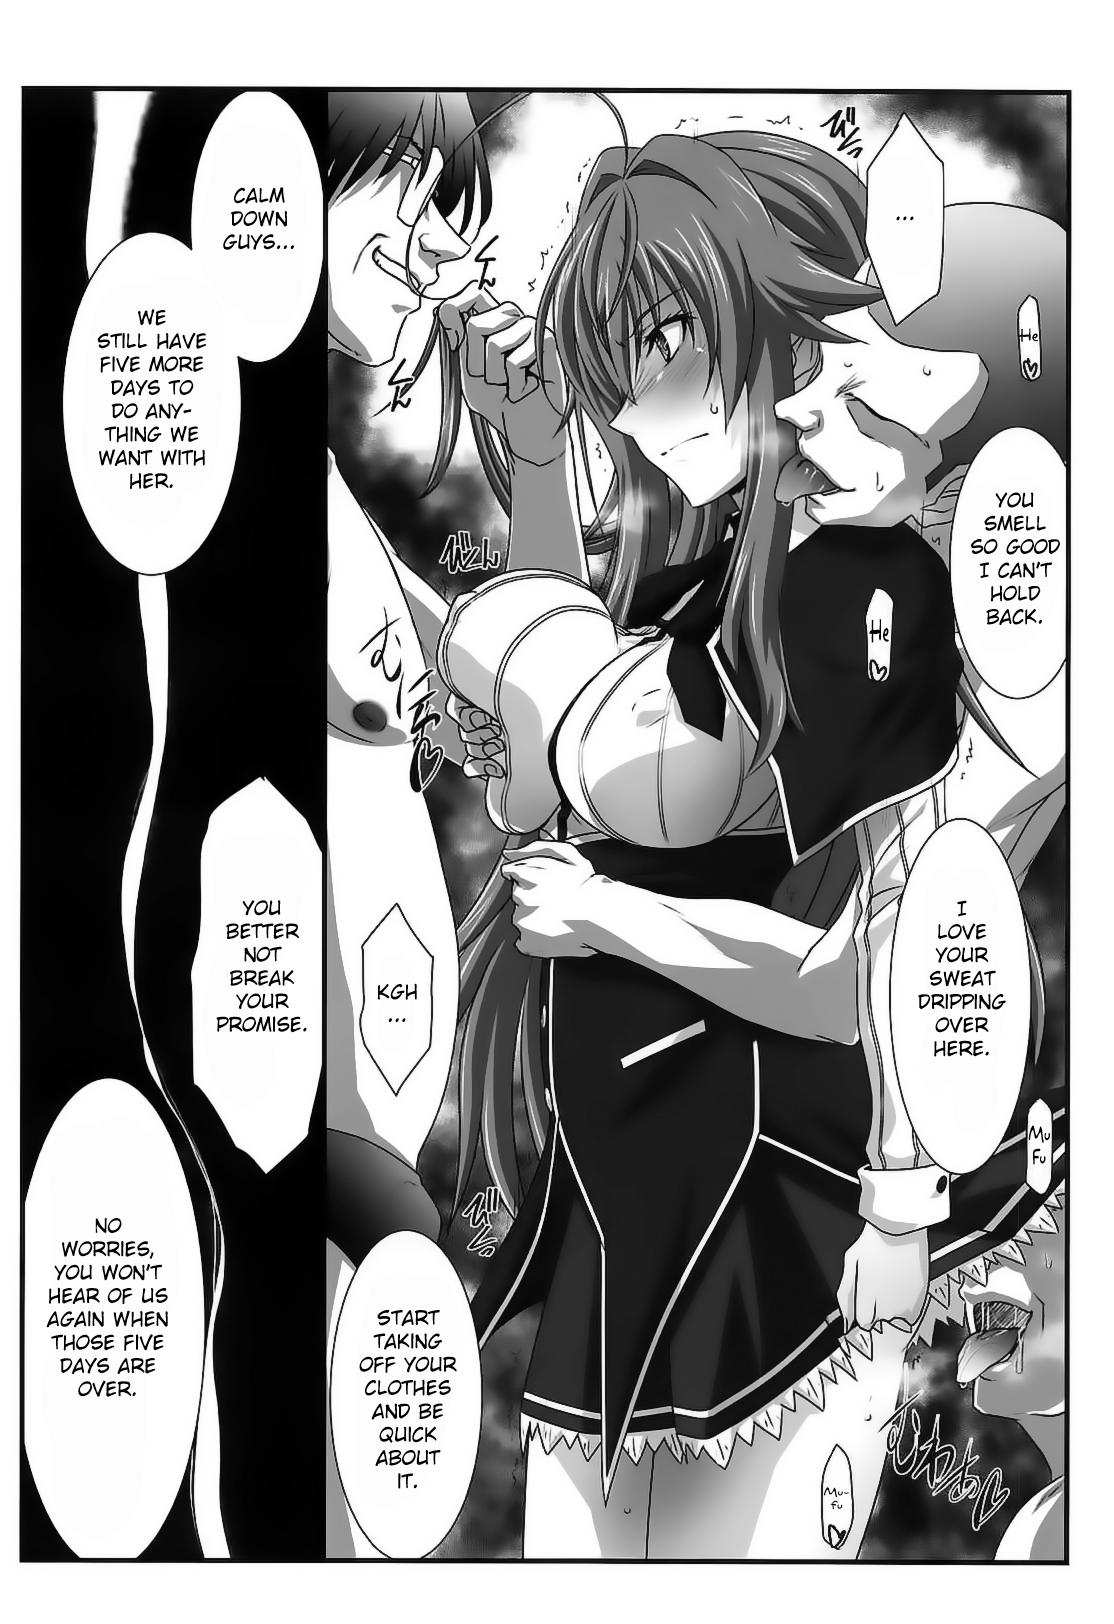 Dick Sucking Porn SPIRAL ZONE DxD II - Highschool dxd Stunning - Page 5